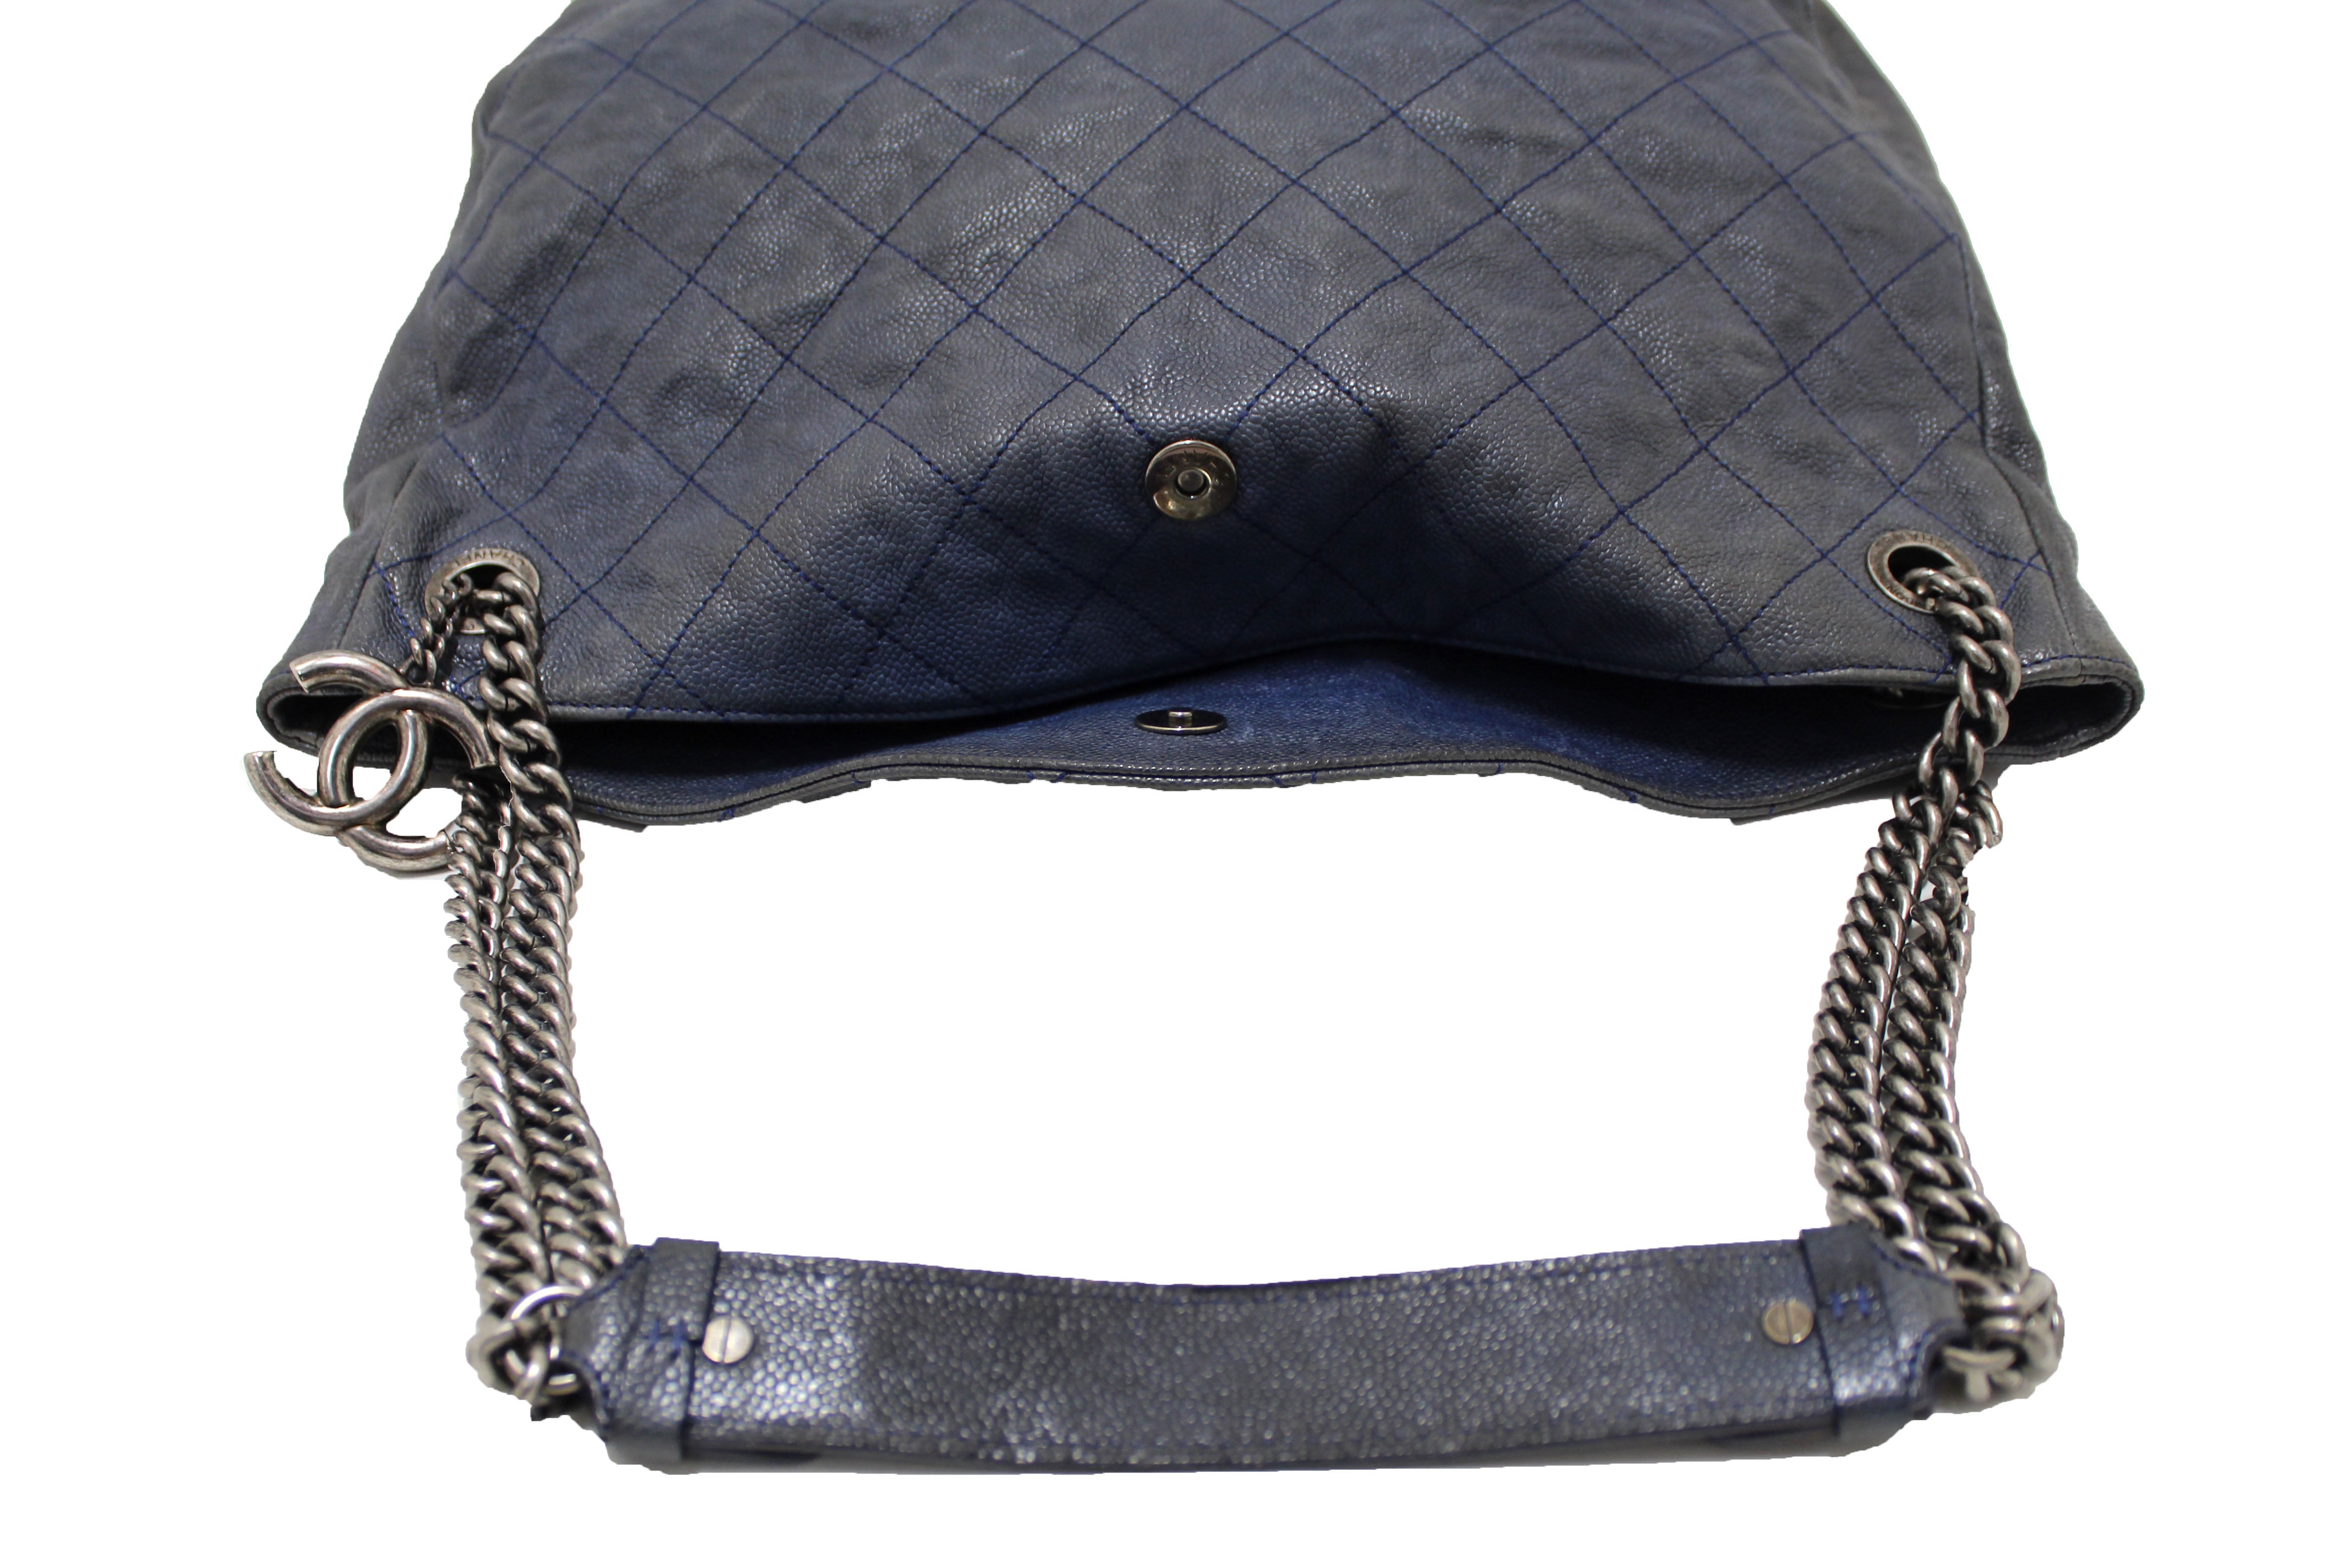 Authentic Chanel Blue Quilted Caviar Leather Hobo Shoulder Bag